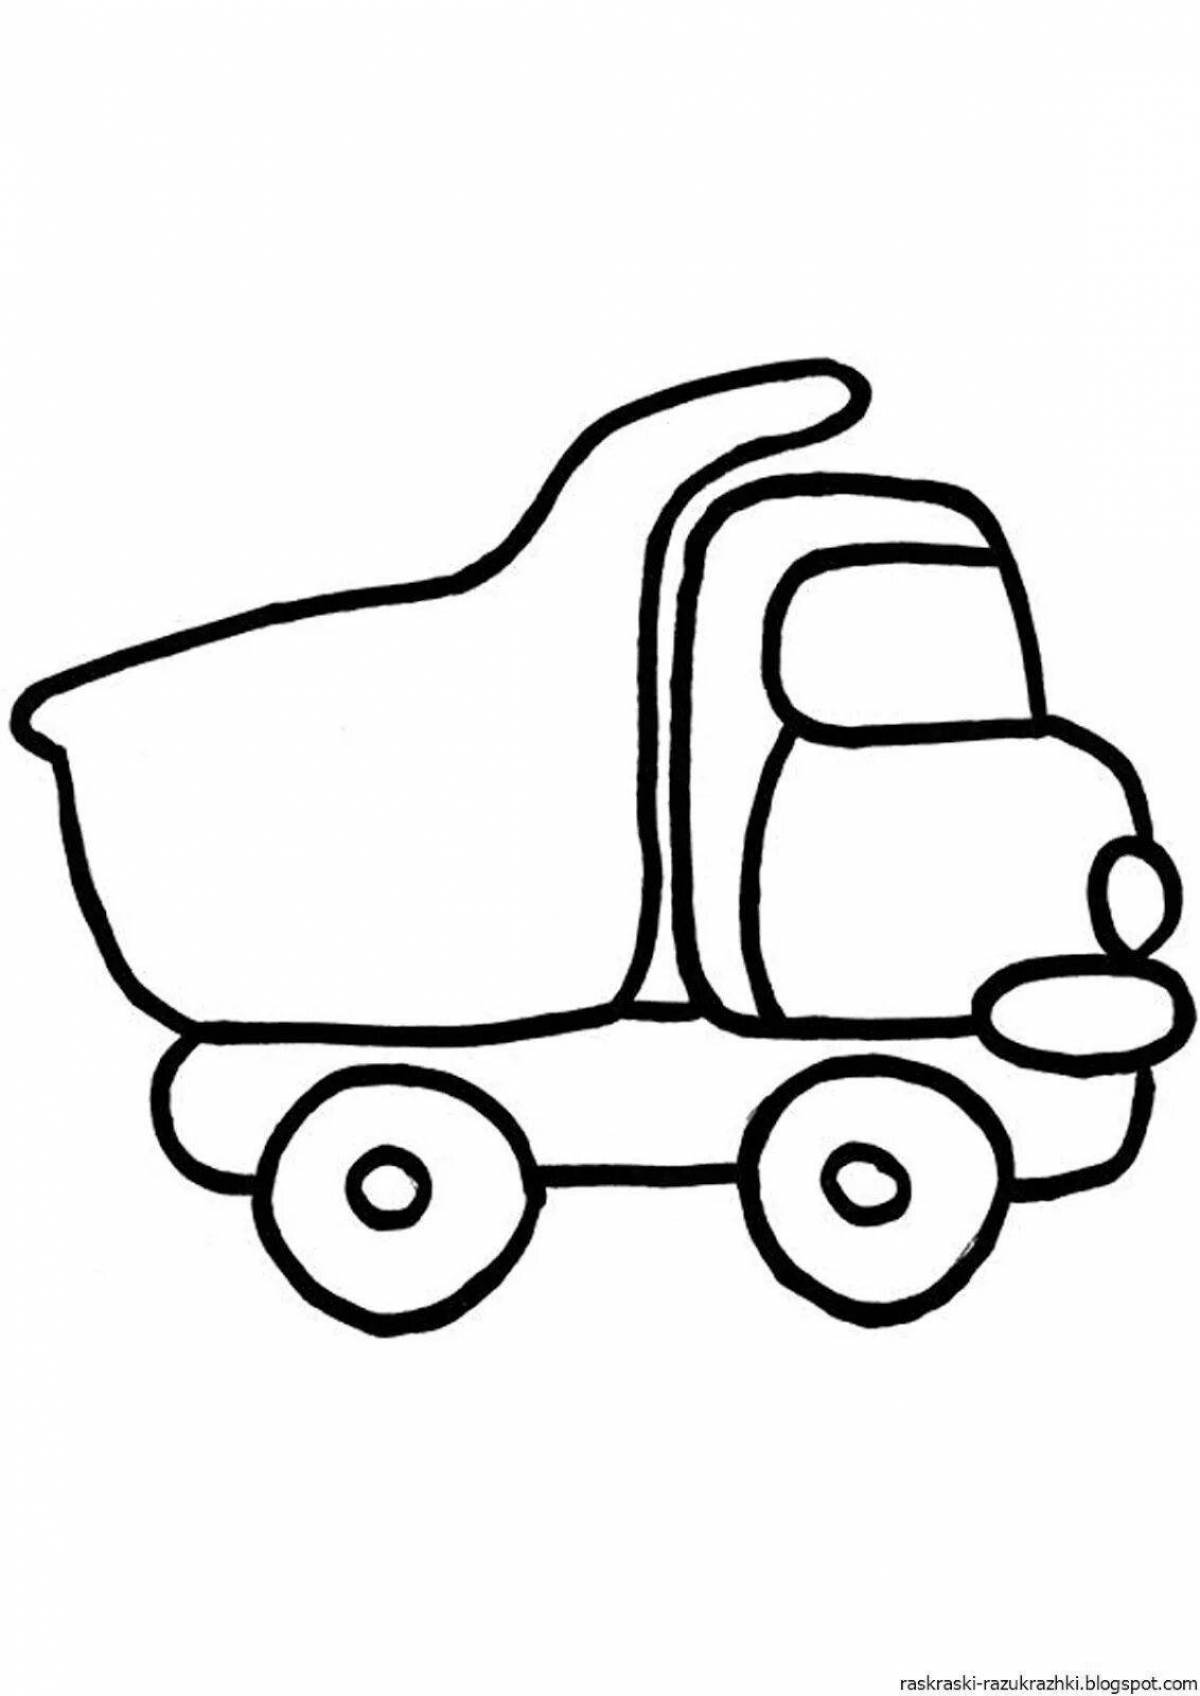 Great truck coloring book for 2-3 year olds